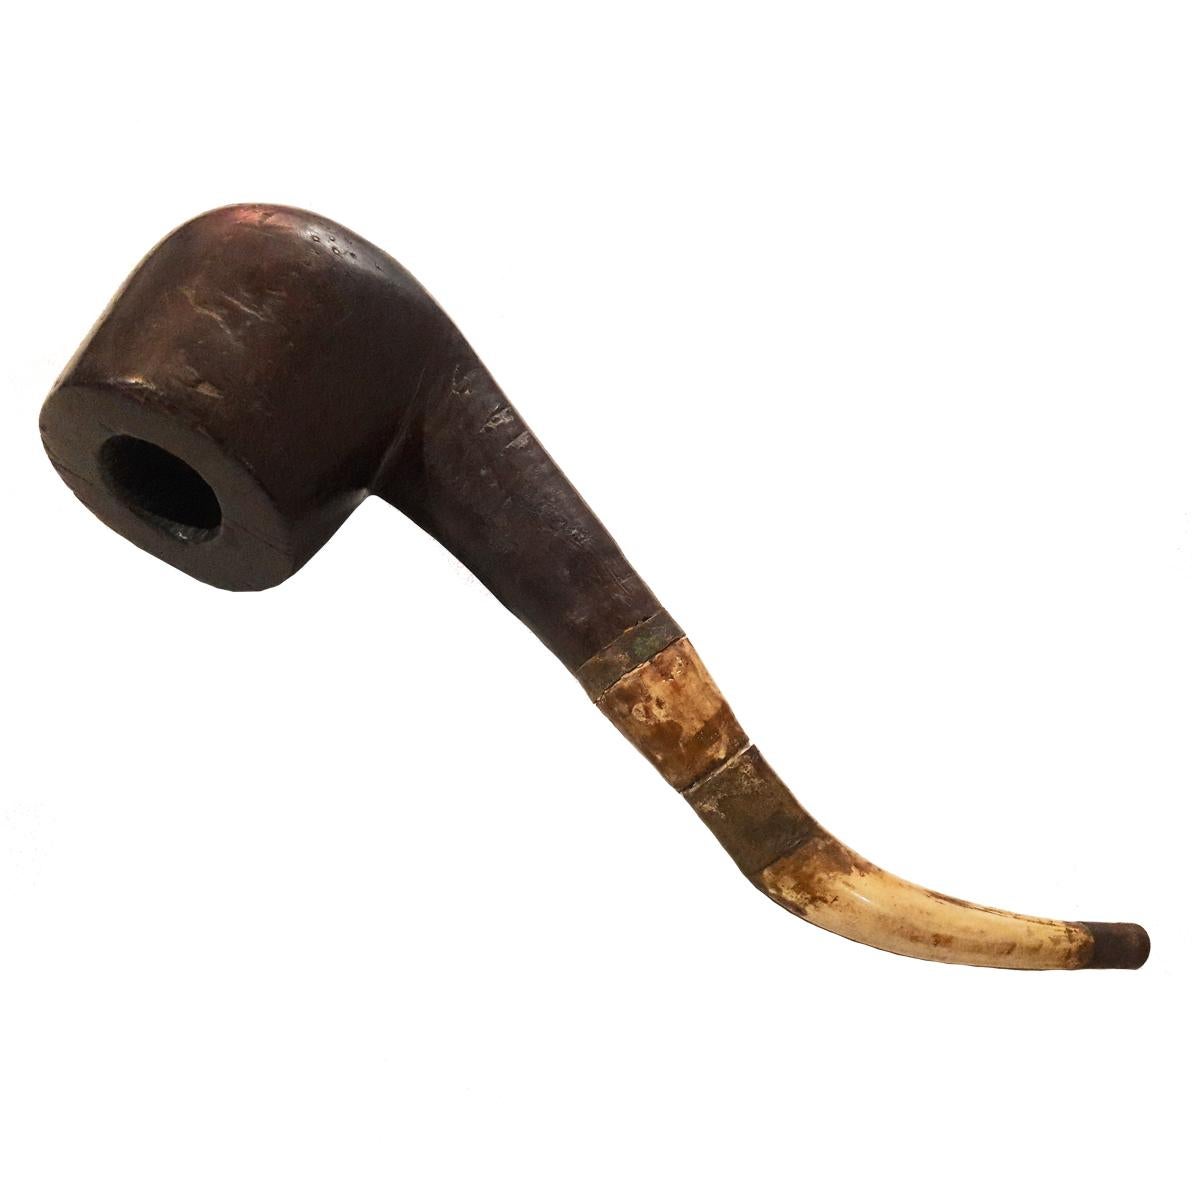 A large tobacco pipe from old Burma (Myanmar), circa 1850. Solid wood bowl, chamber and shank. The stem is made of bone, attached to the shank by a mortise in solid brass, and a lip made of brass. All parts are detachable. 

This antique pipe